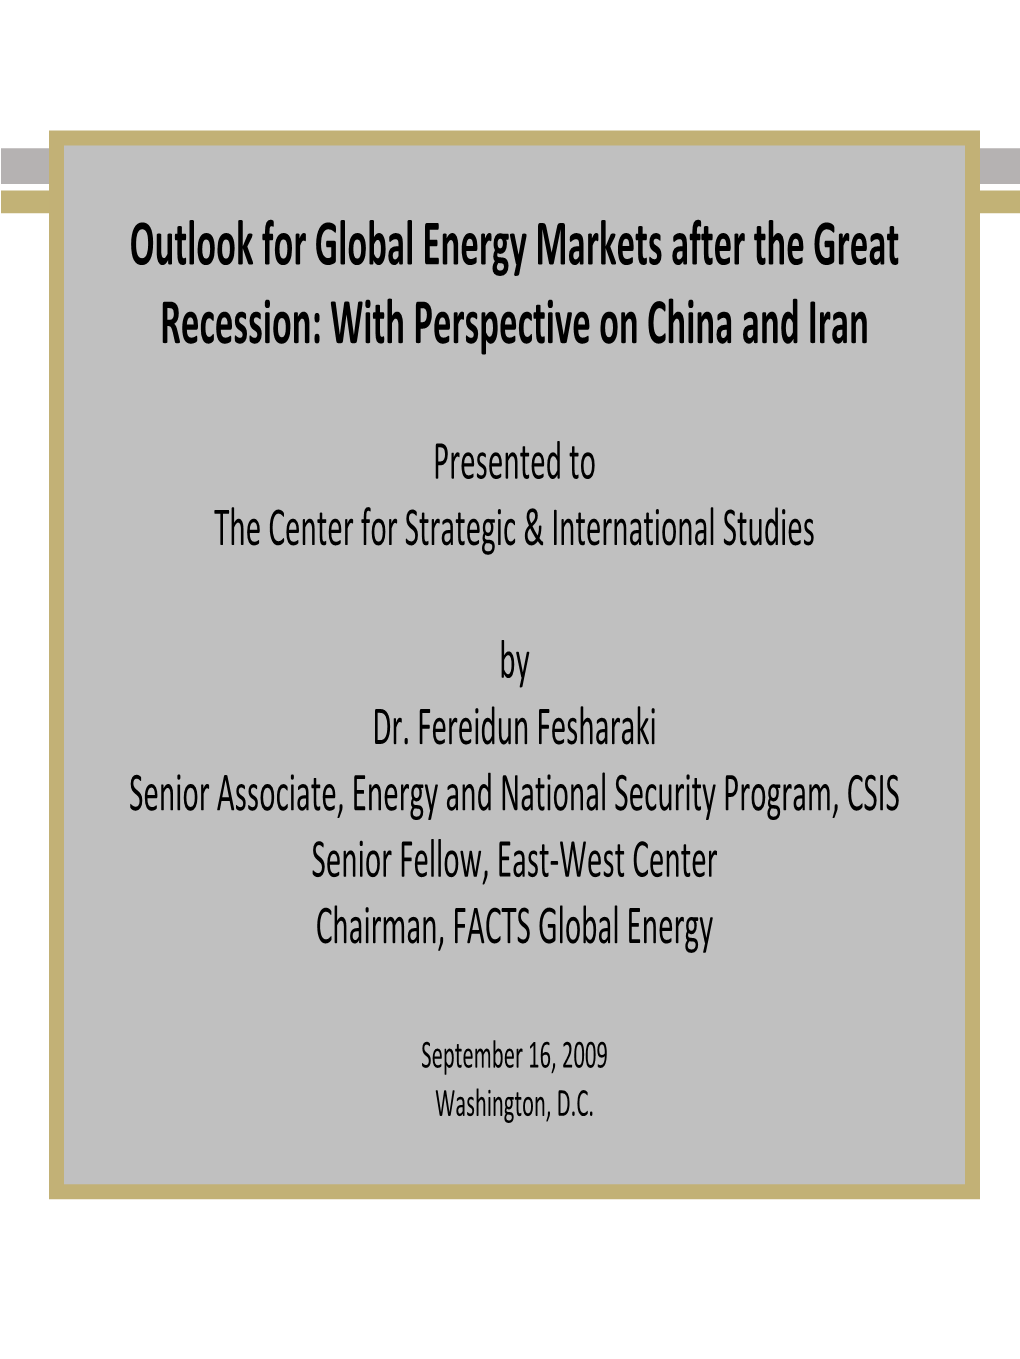 Outlook for Global Energy Markets After the Great Recession: with Perspective on China and Iran